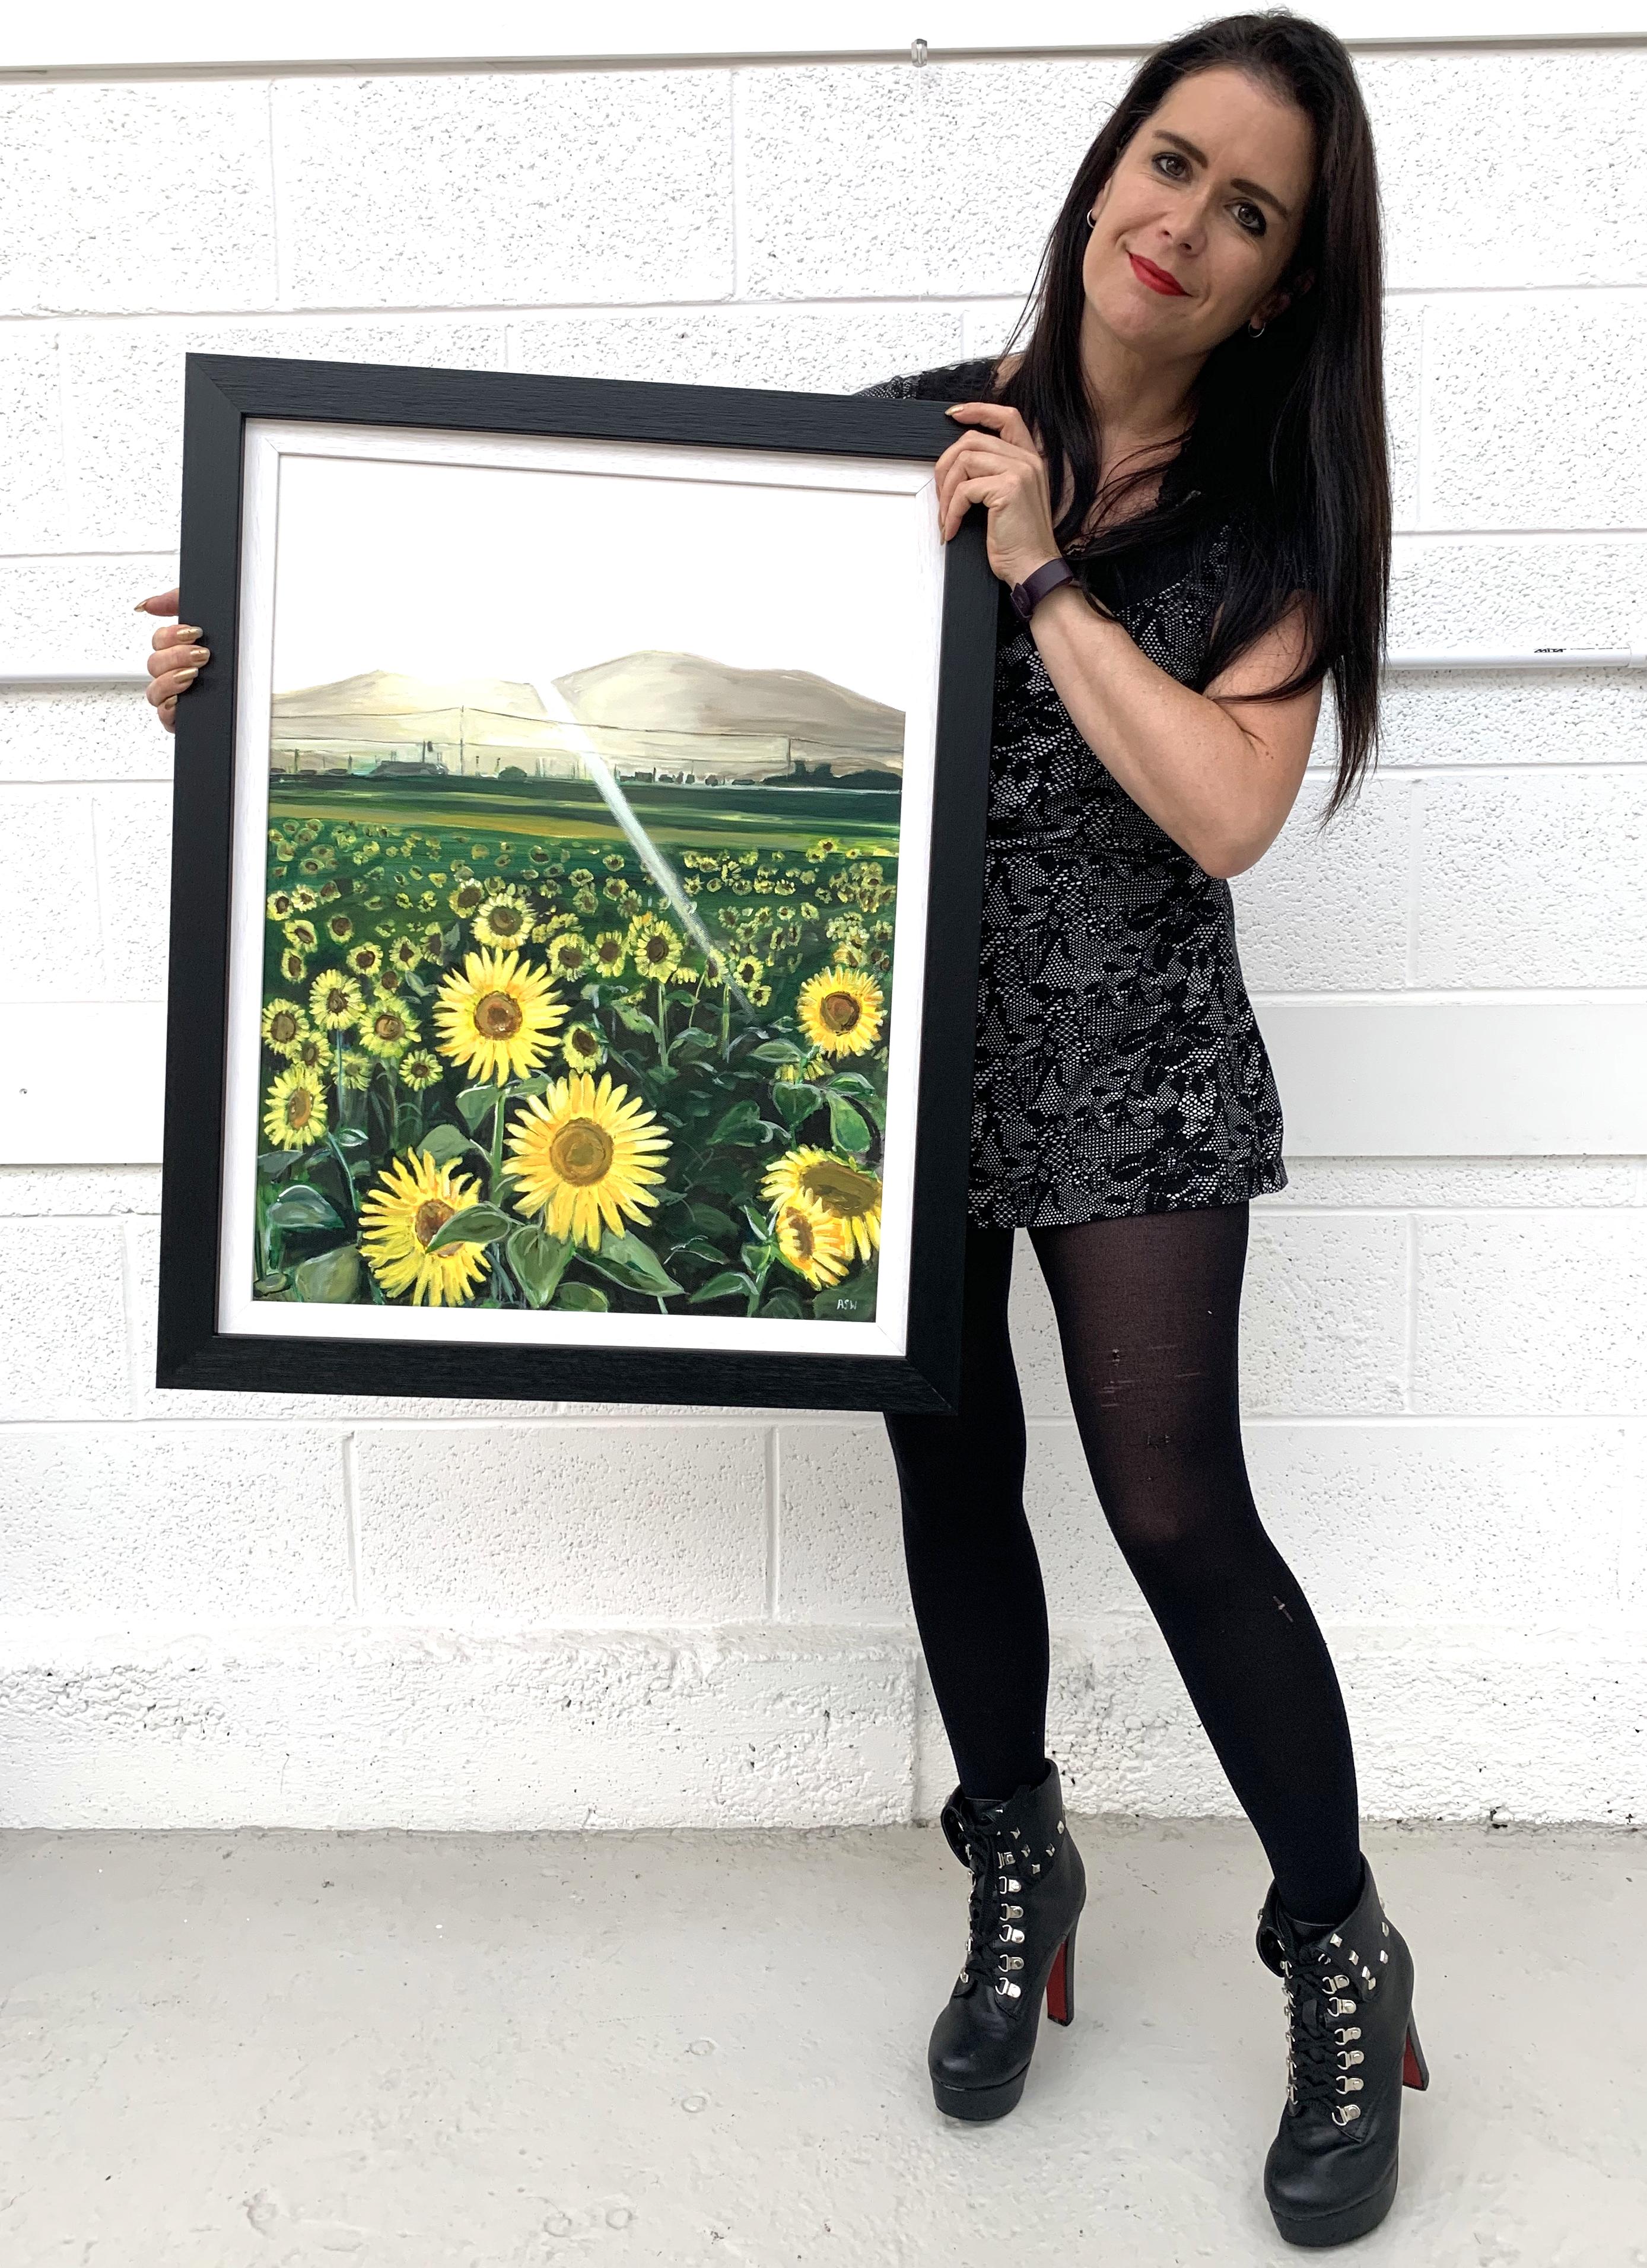 field of sunflowers painting